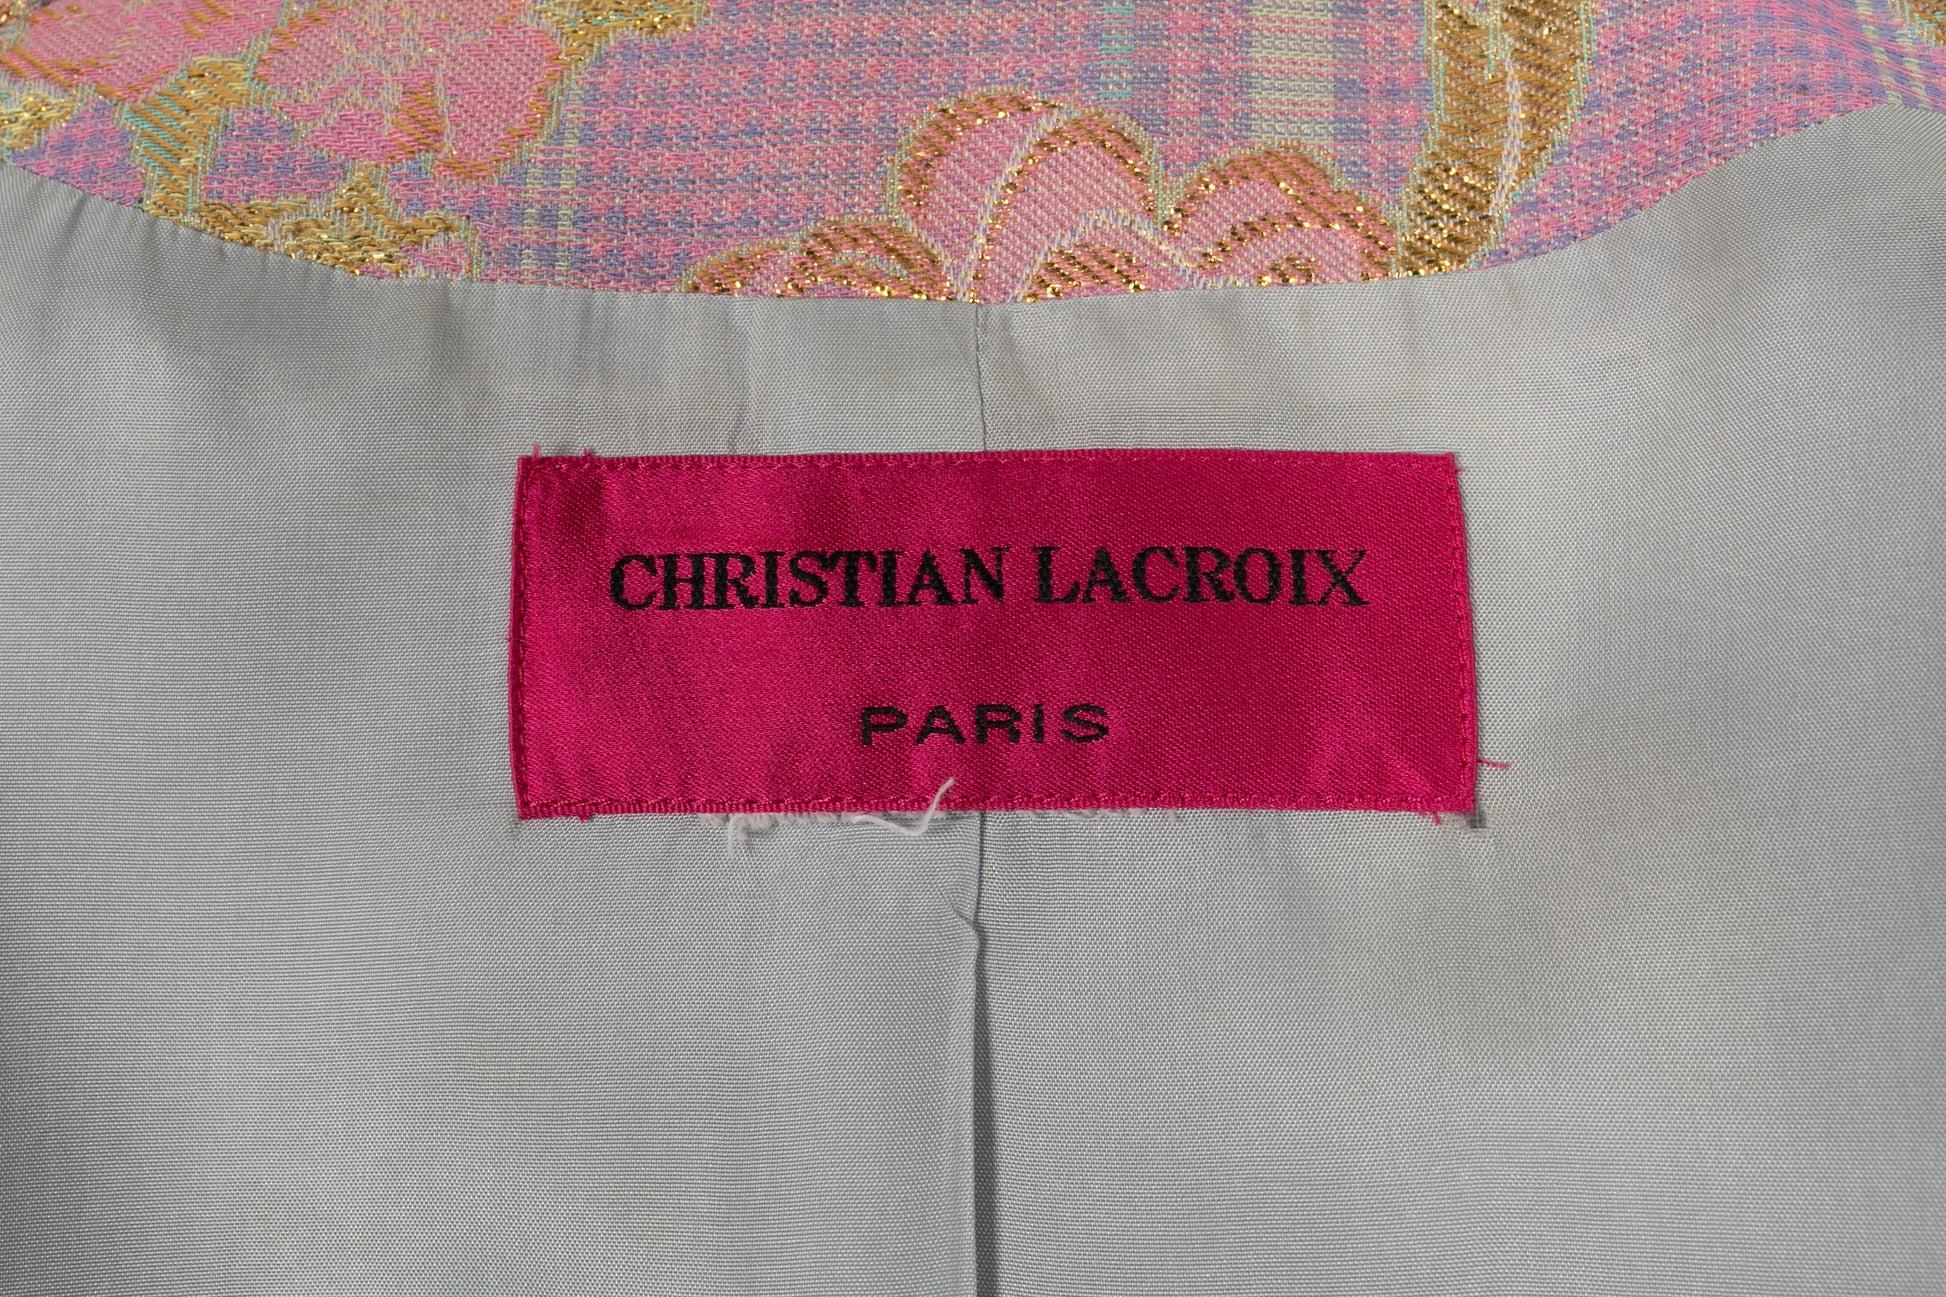 Christian Lacroix Embroidered Jacket Enhanced with Lurex Yarns, 1990s For Sale 4